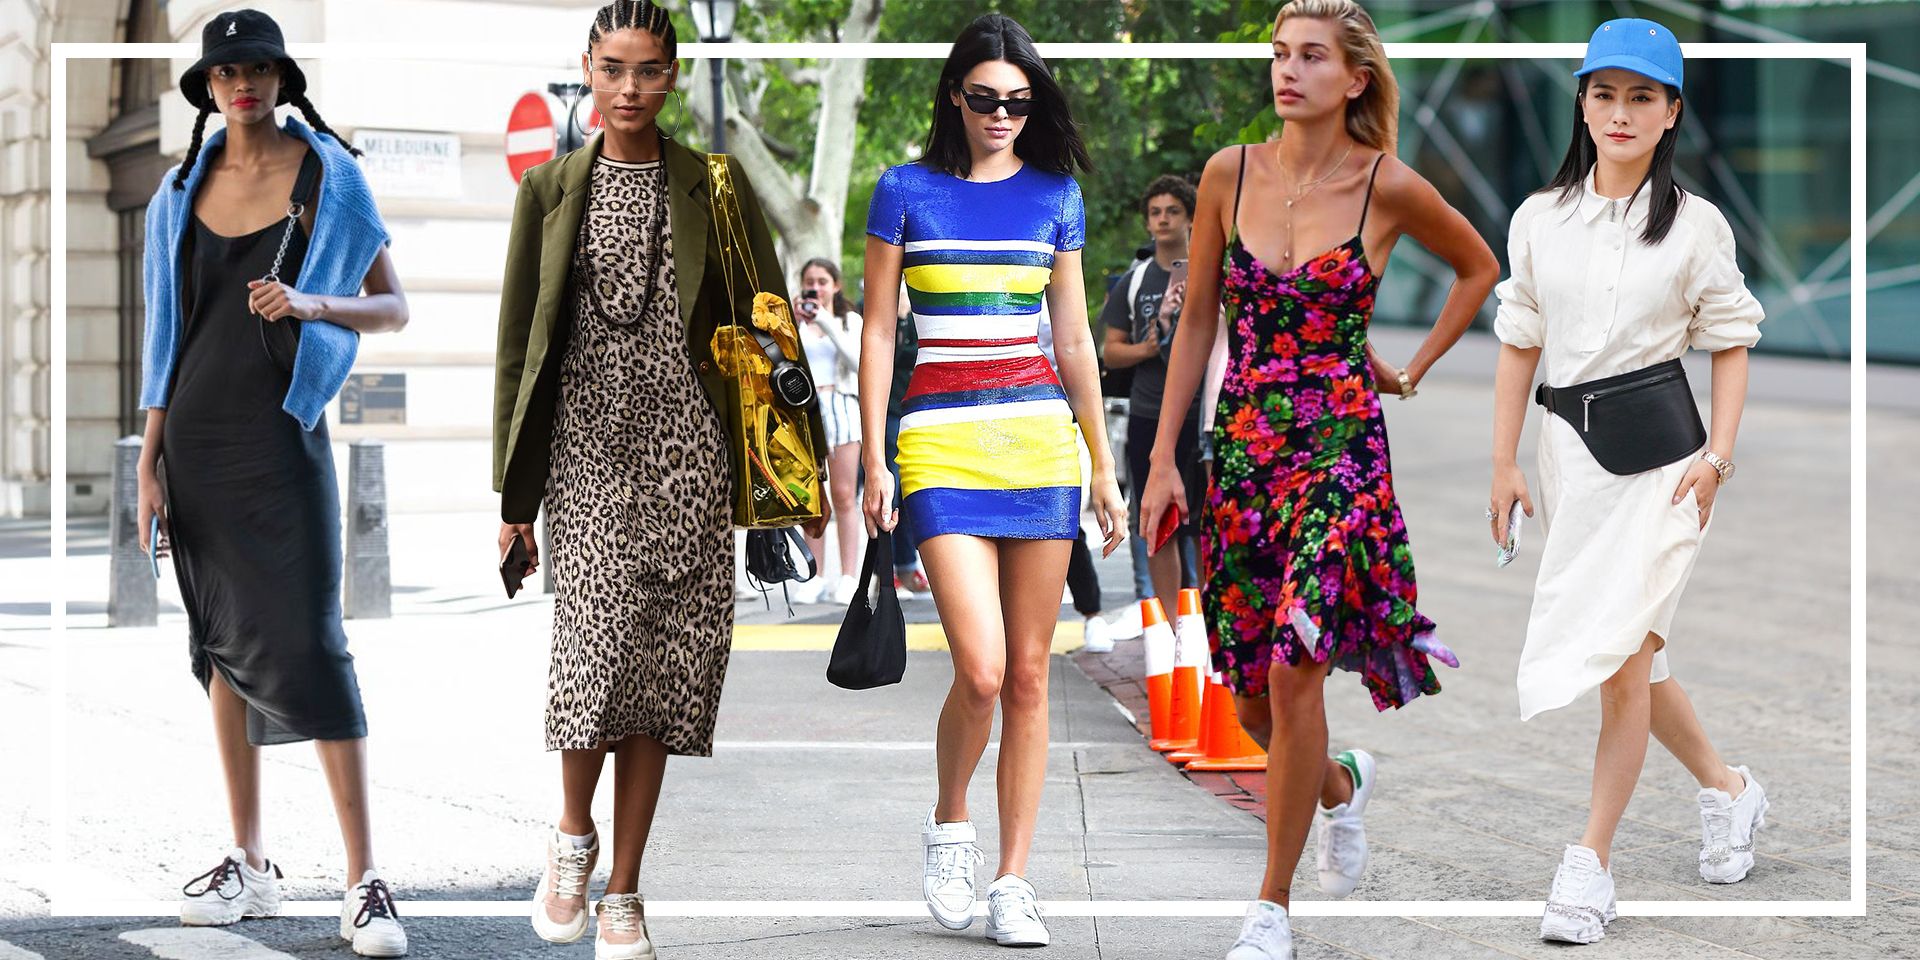 sneakers you can wear with dresses